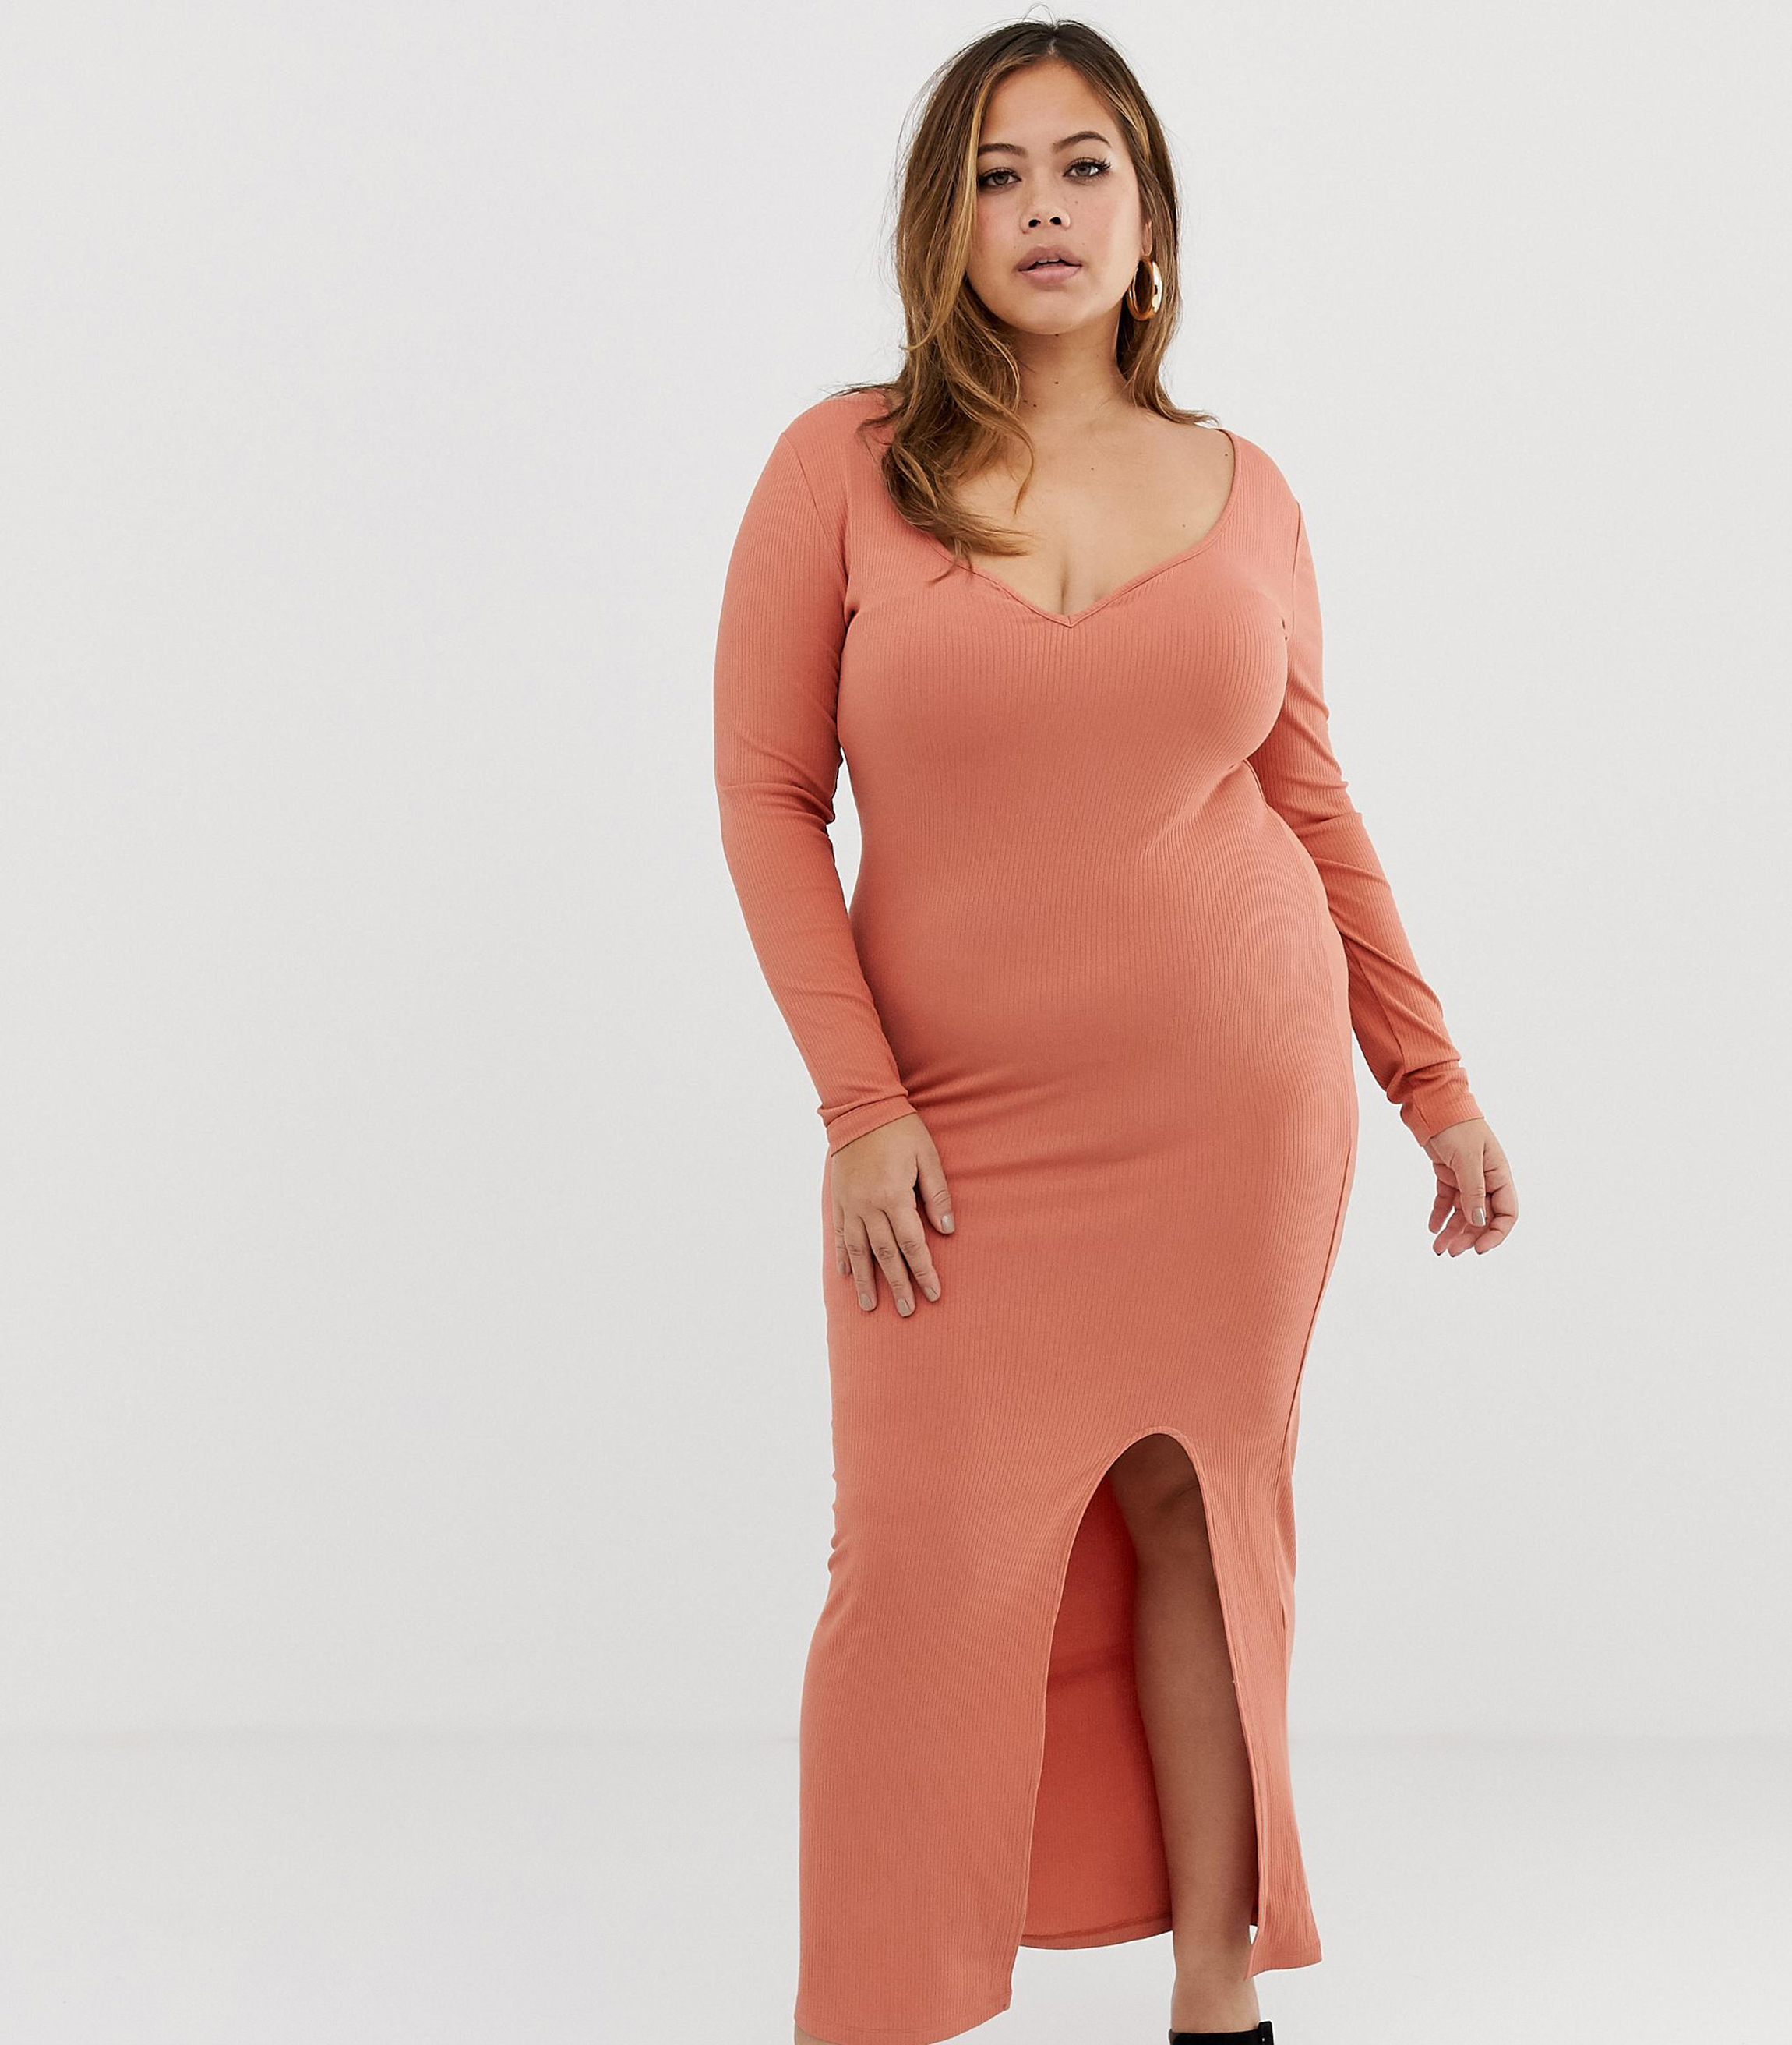 ASOS DESIGN Curve Rib Maxi Dress with Sweetheart Neck and Split, £8 (was £22); shoes out of stock, ASOS